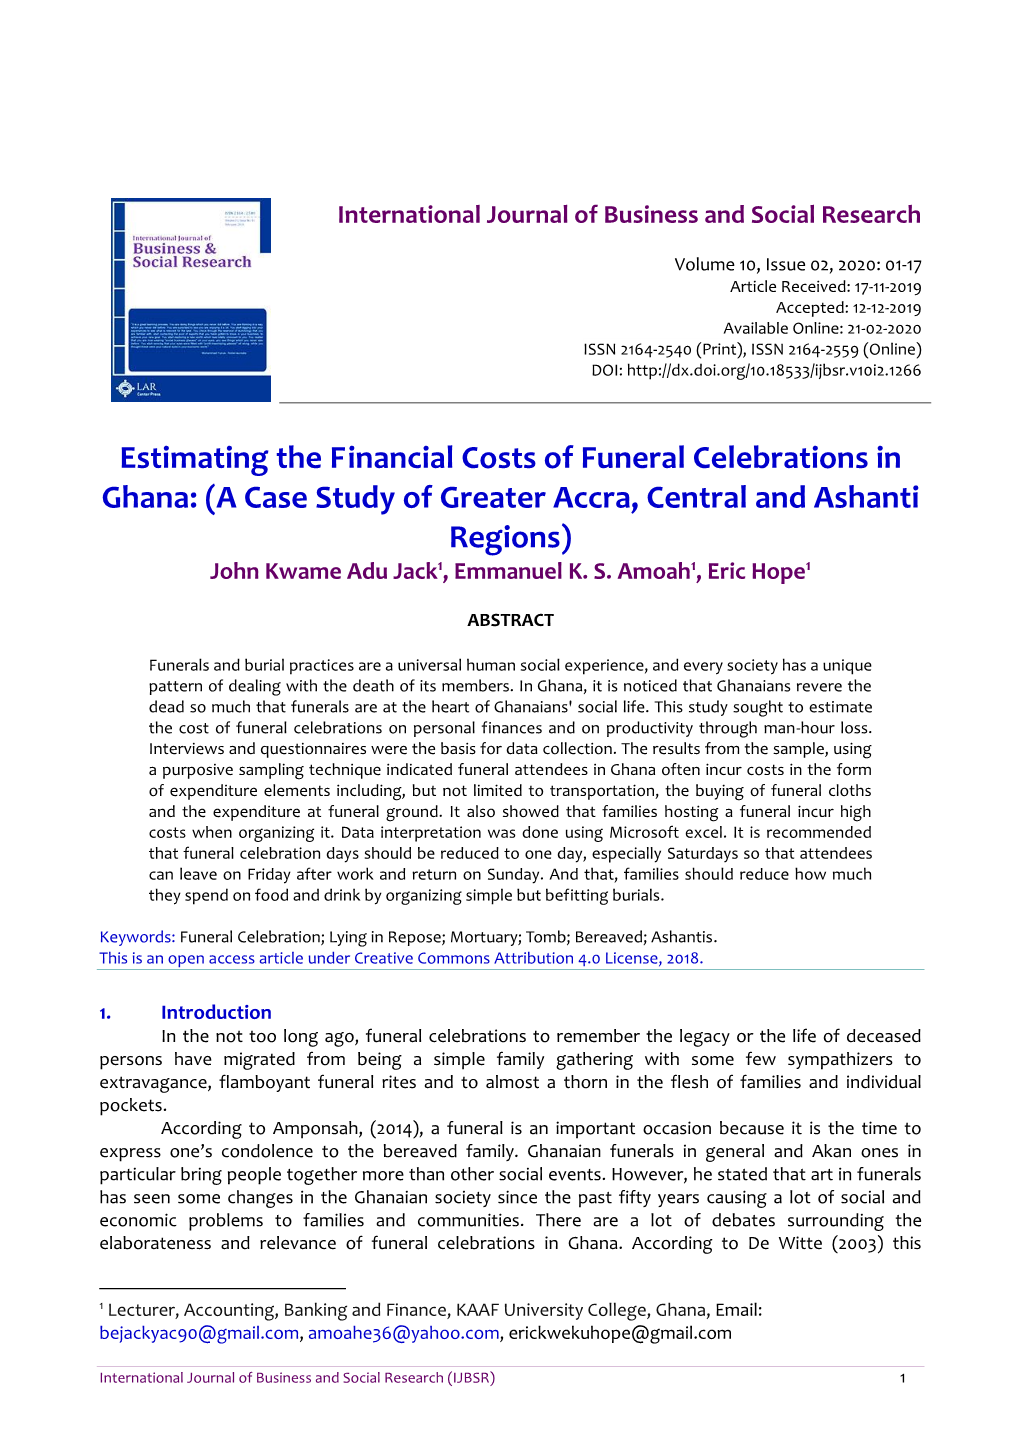 Estimating the Financial Costs of Funeral Celebrations in Ghana: (A Case Study of Greater Accra, Central and Ashanti Regions) John Kwame Adu Jack1, Emmanuel K